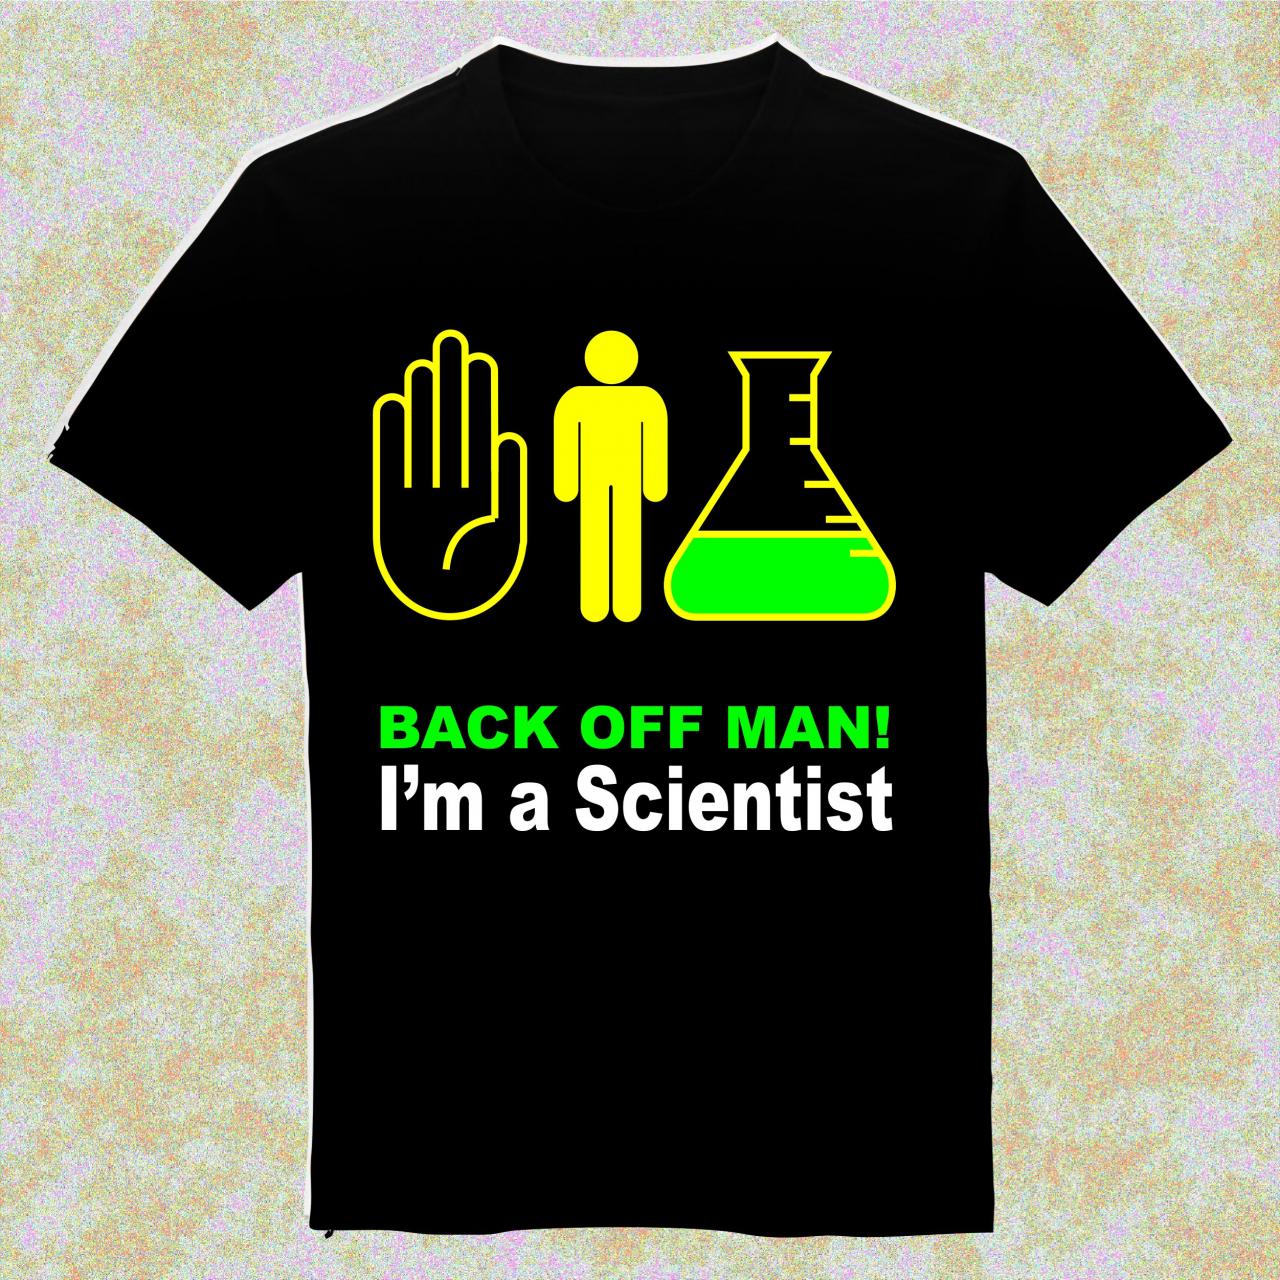 Back Off Man, Im A Scientist, T-shirt Mens And Womens Cotton ...